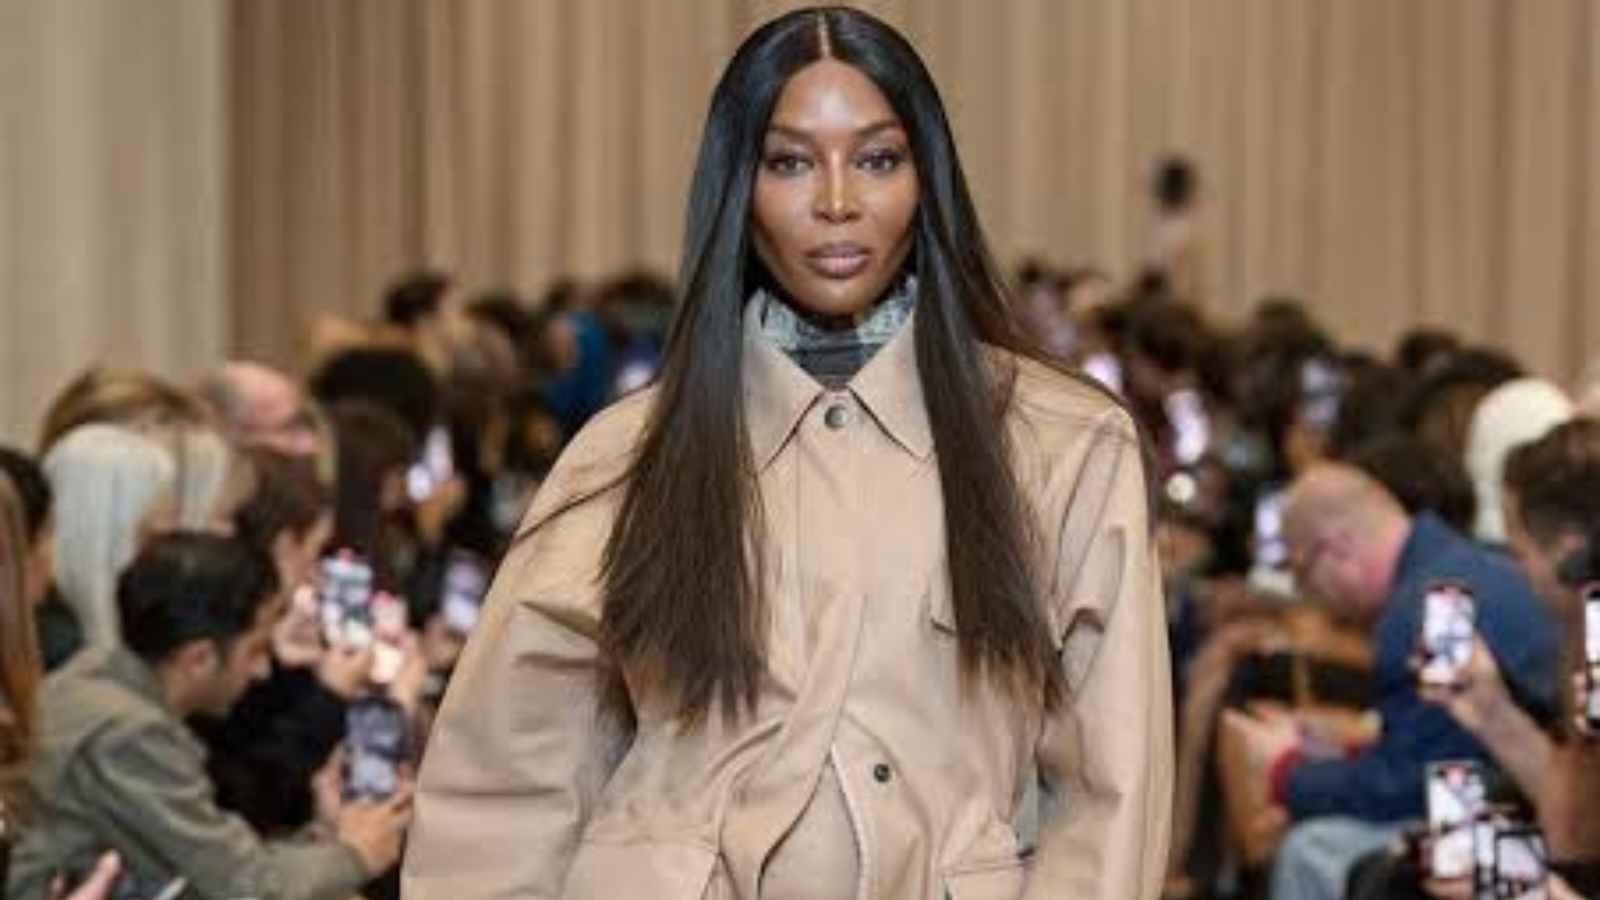 Naomi Campbell in Burberry suit giving us Academia